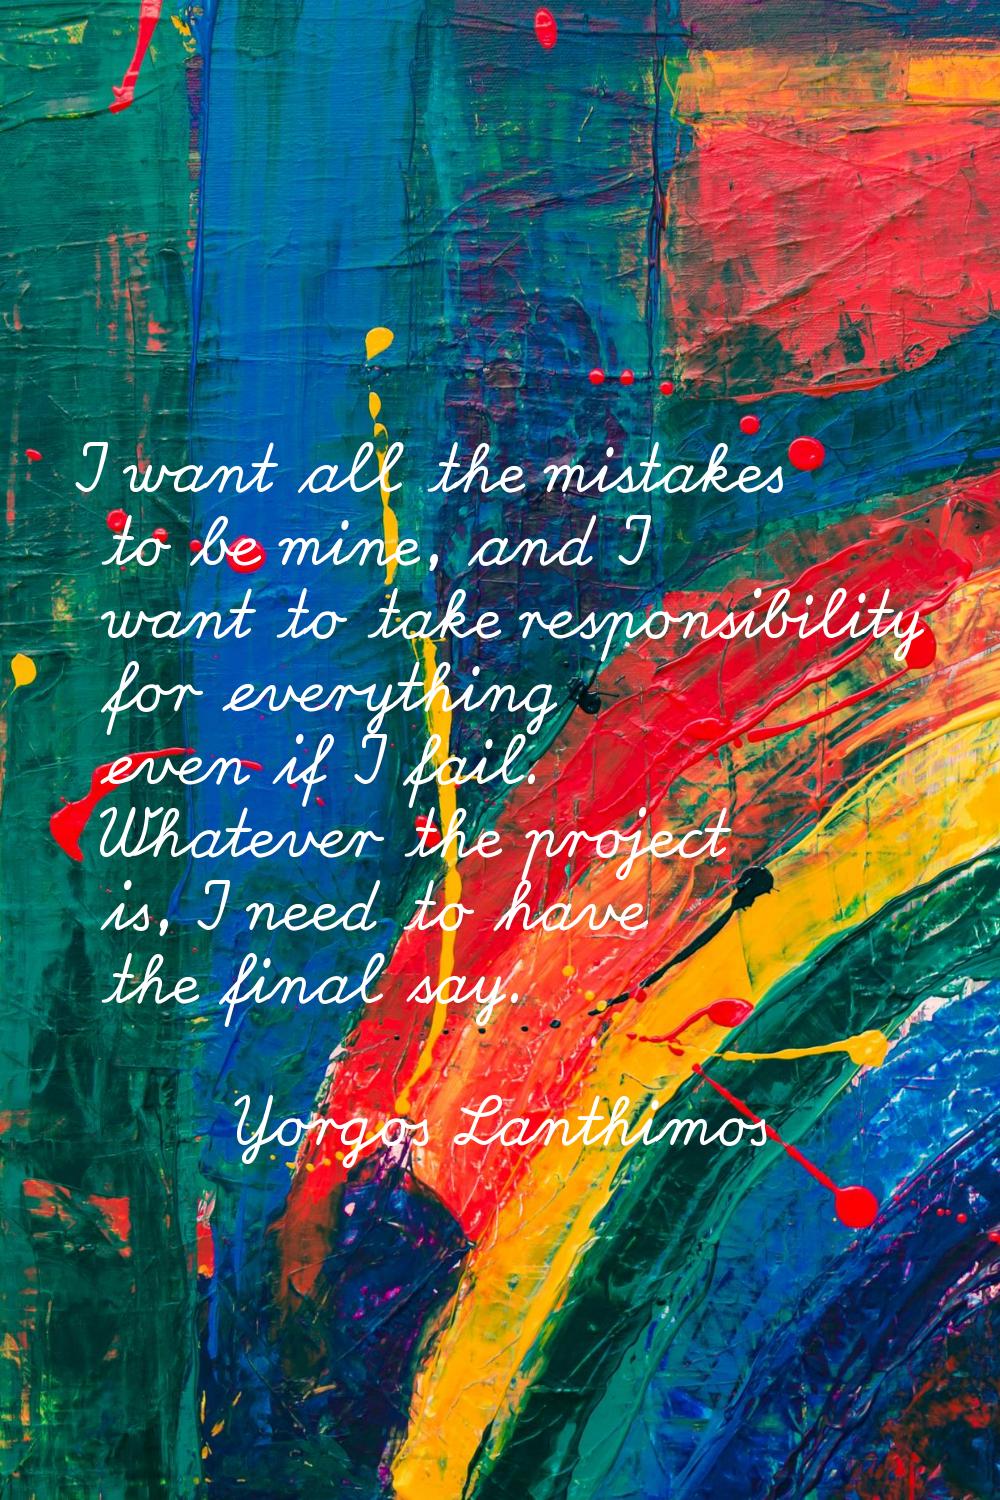 I want all the mistakes to be mine, and I want to take responsibility for everything even if I fail